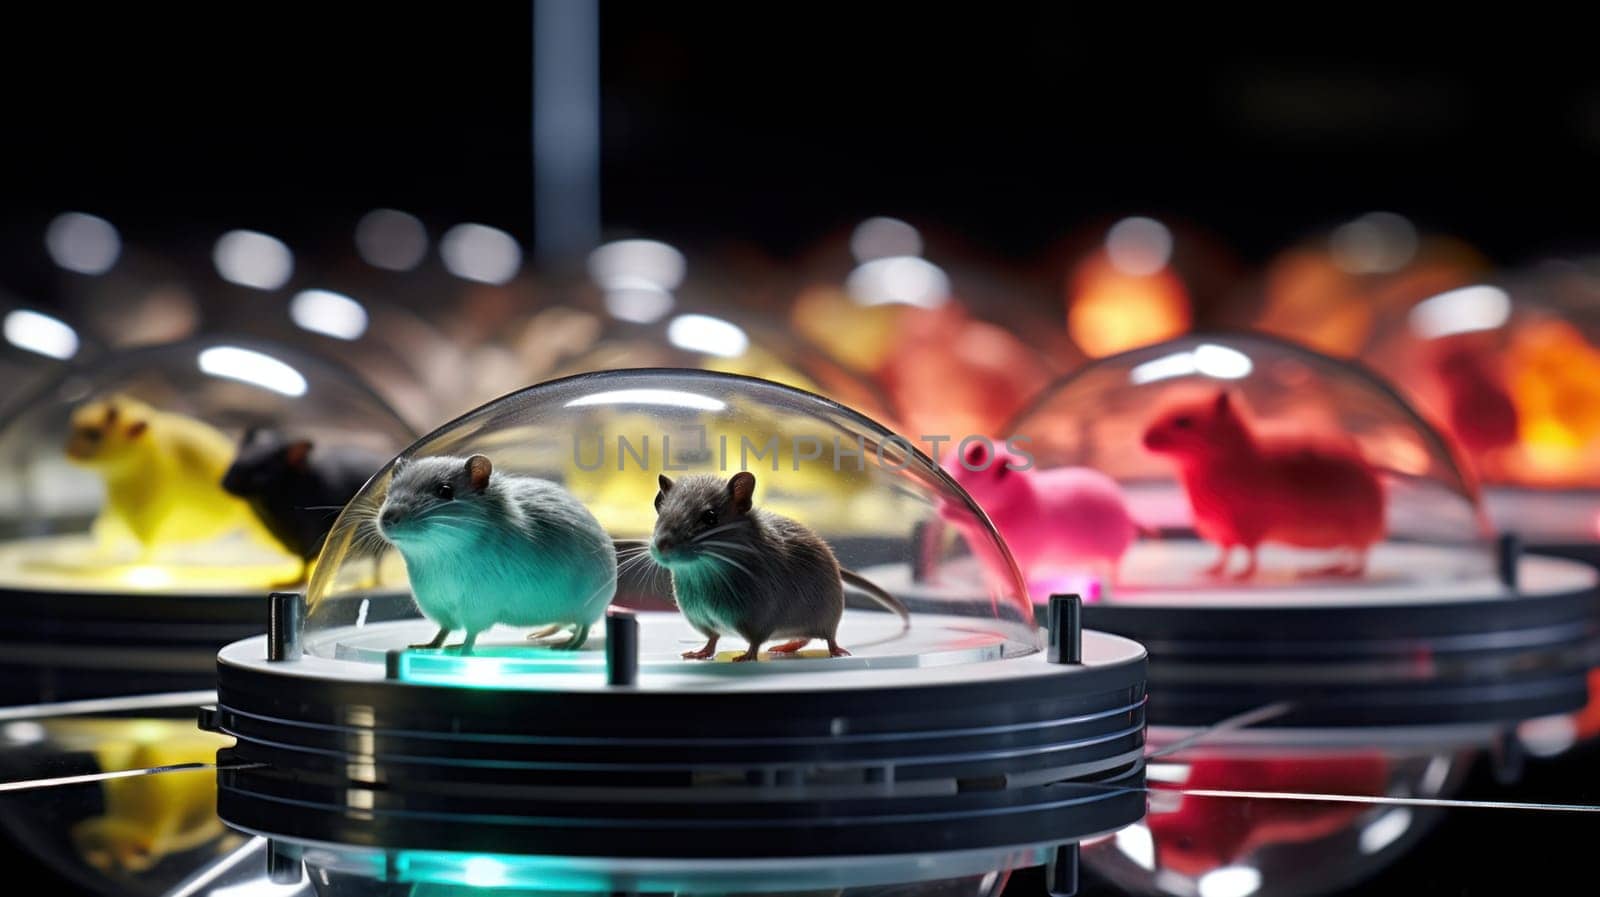 A group of small mice in glass domes on a table, AI by starush